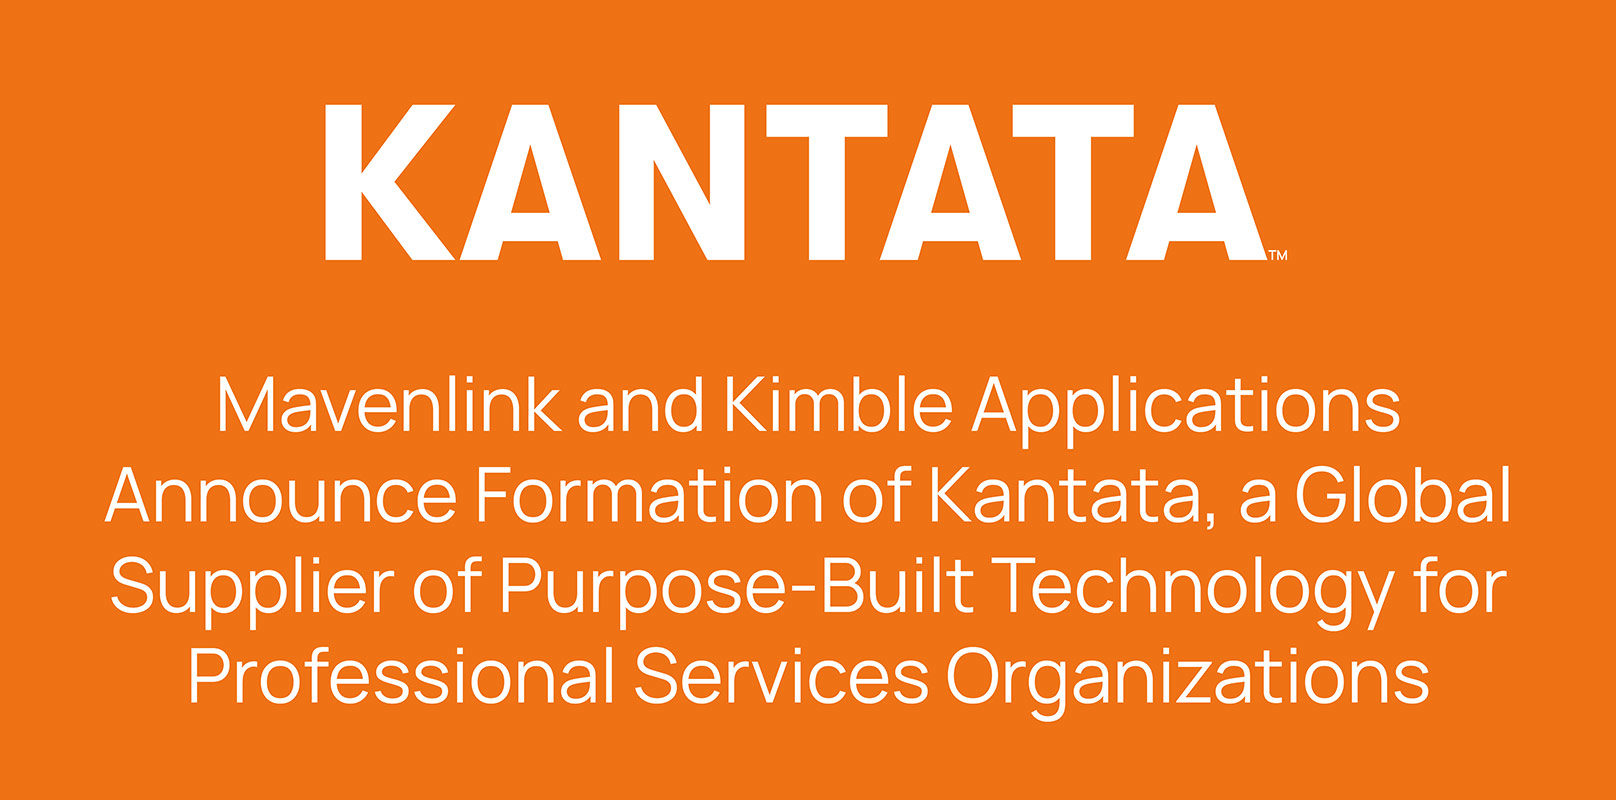 Mavenlink and Kimble Applications today announced the launch of Kantata